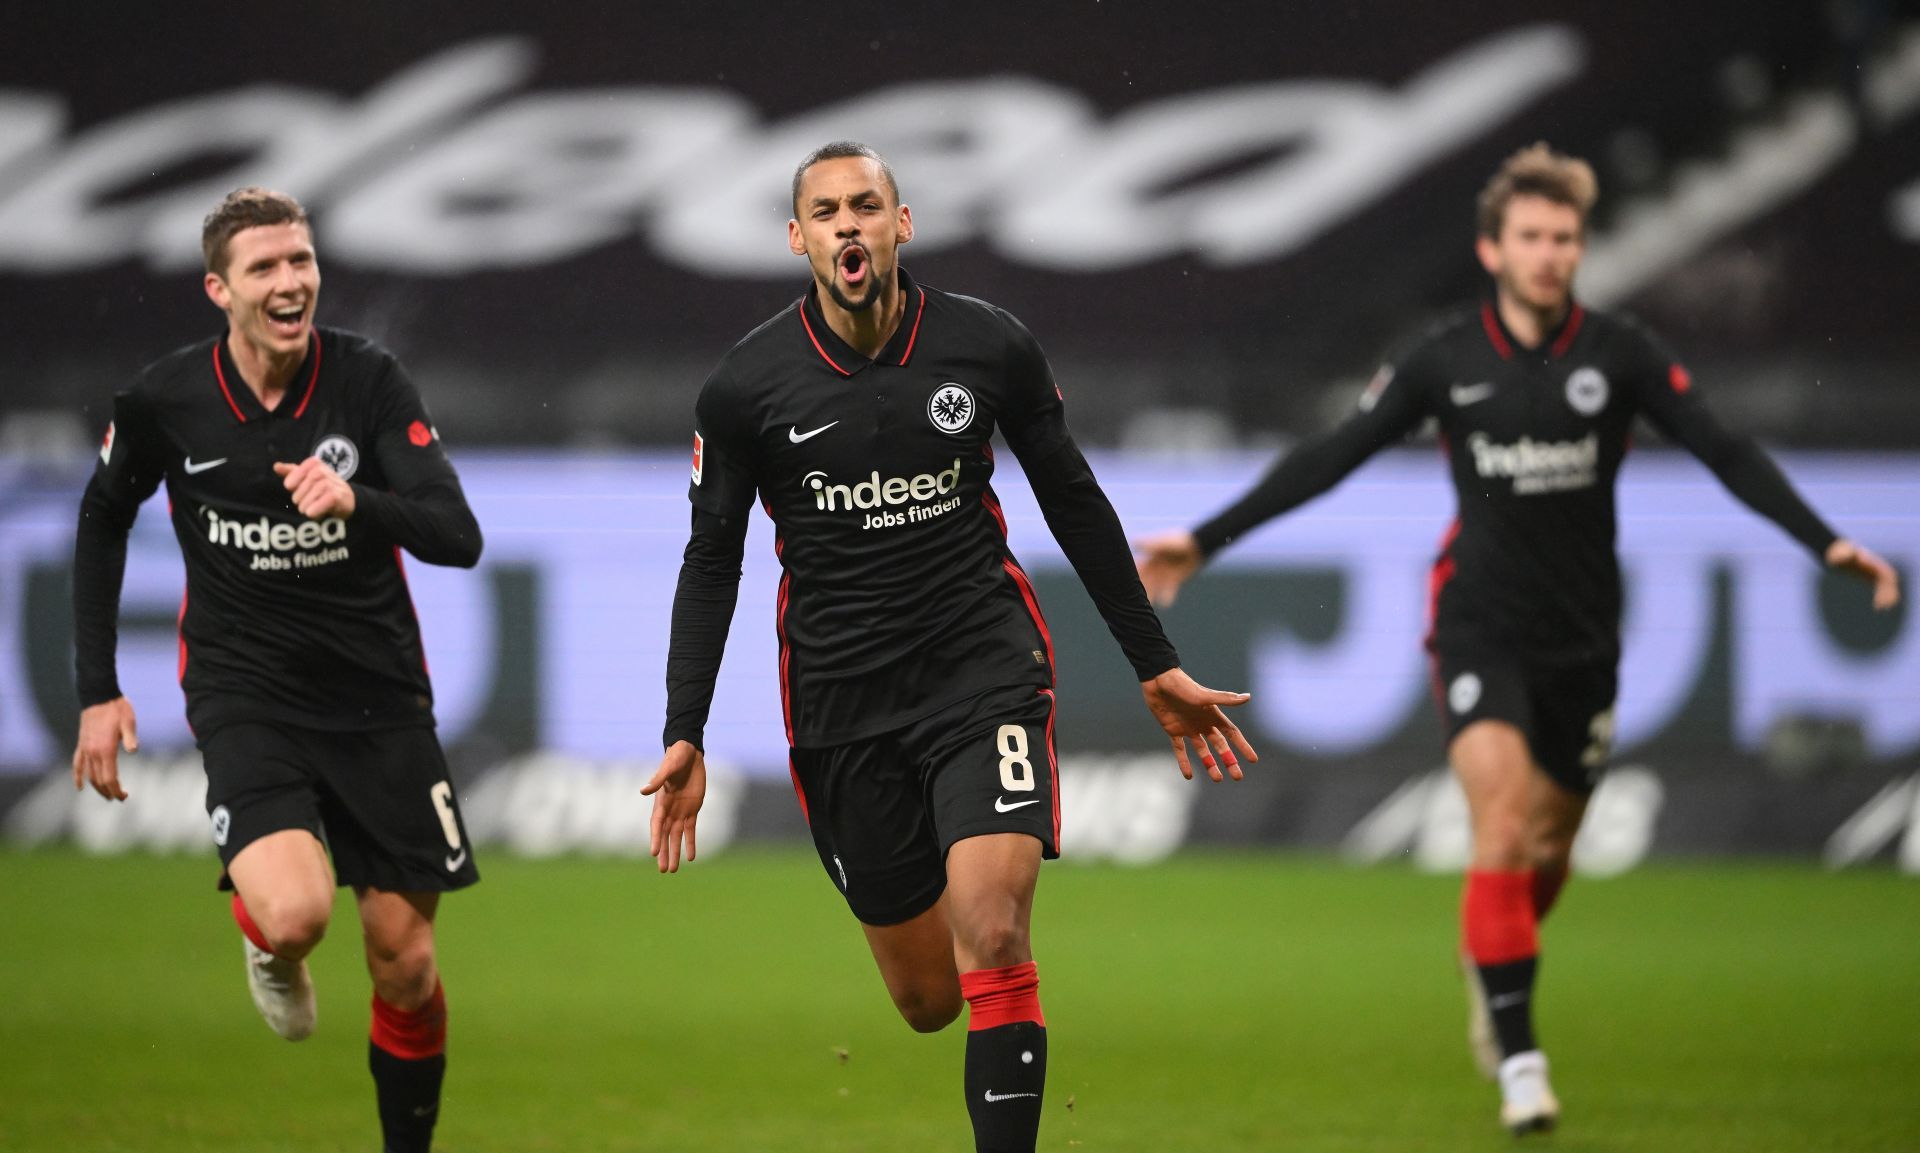 Eintracht Frankfurt are looking to continue their good form